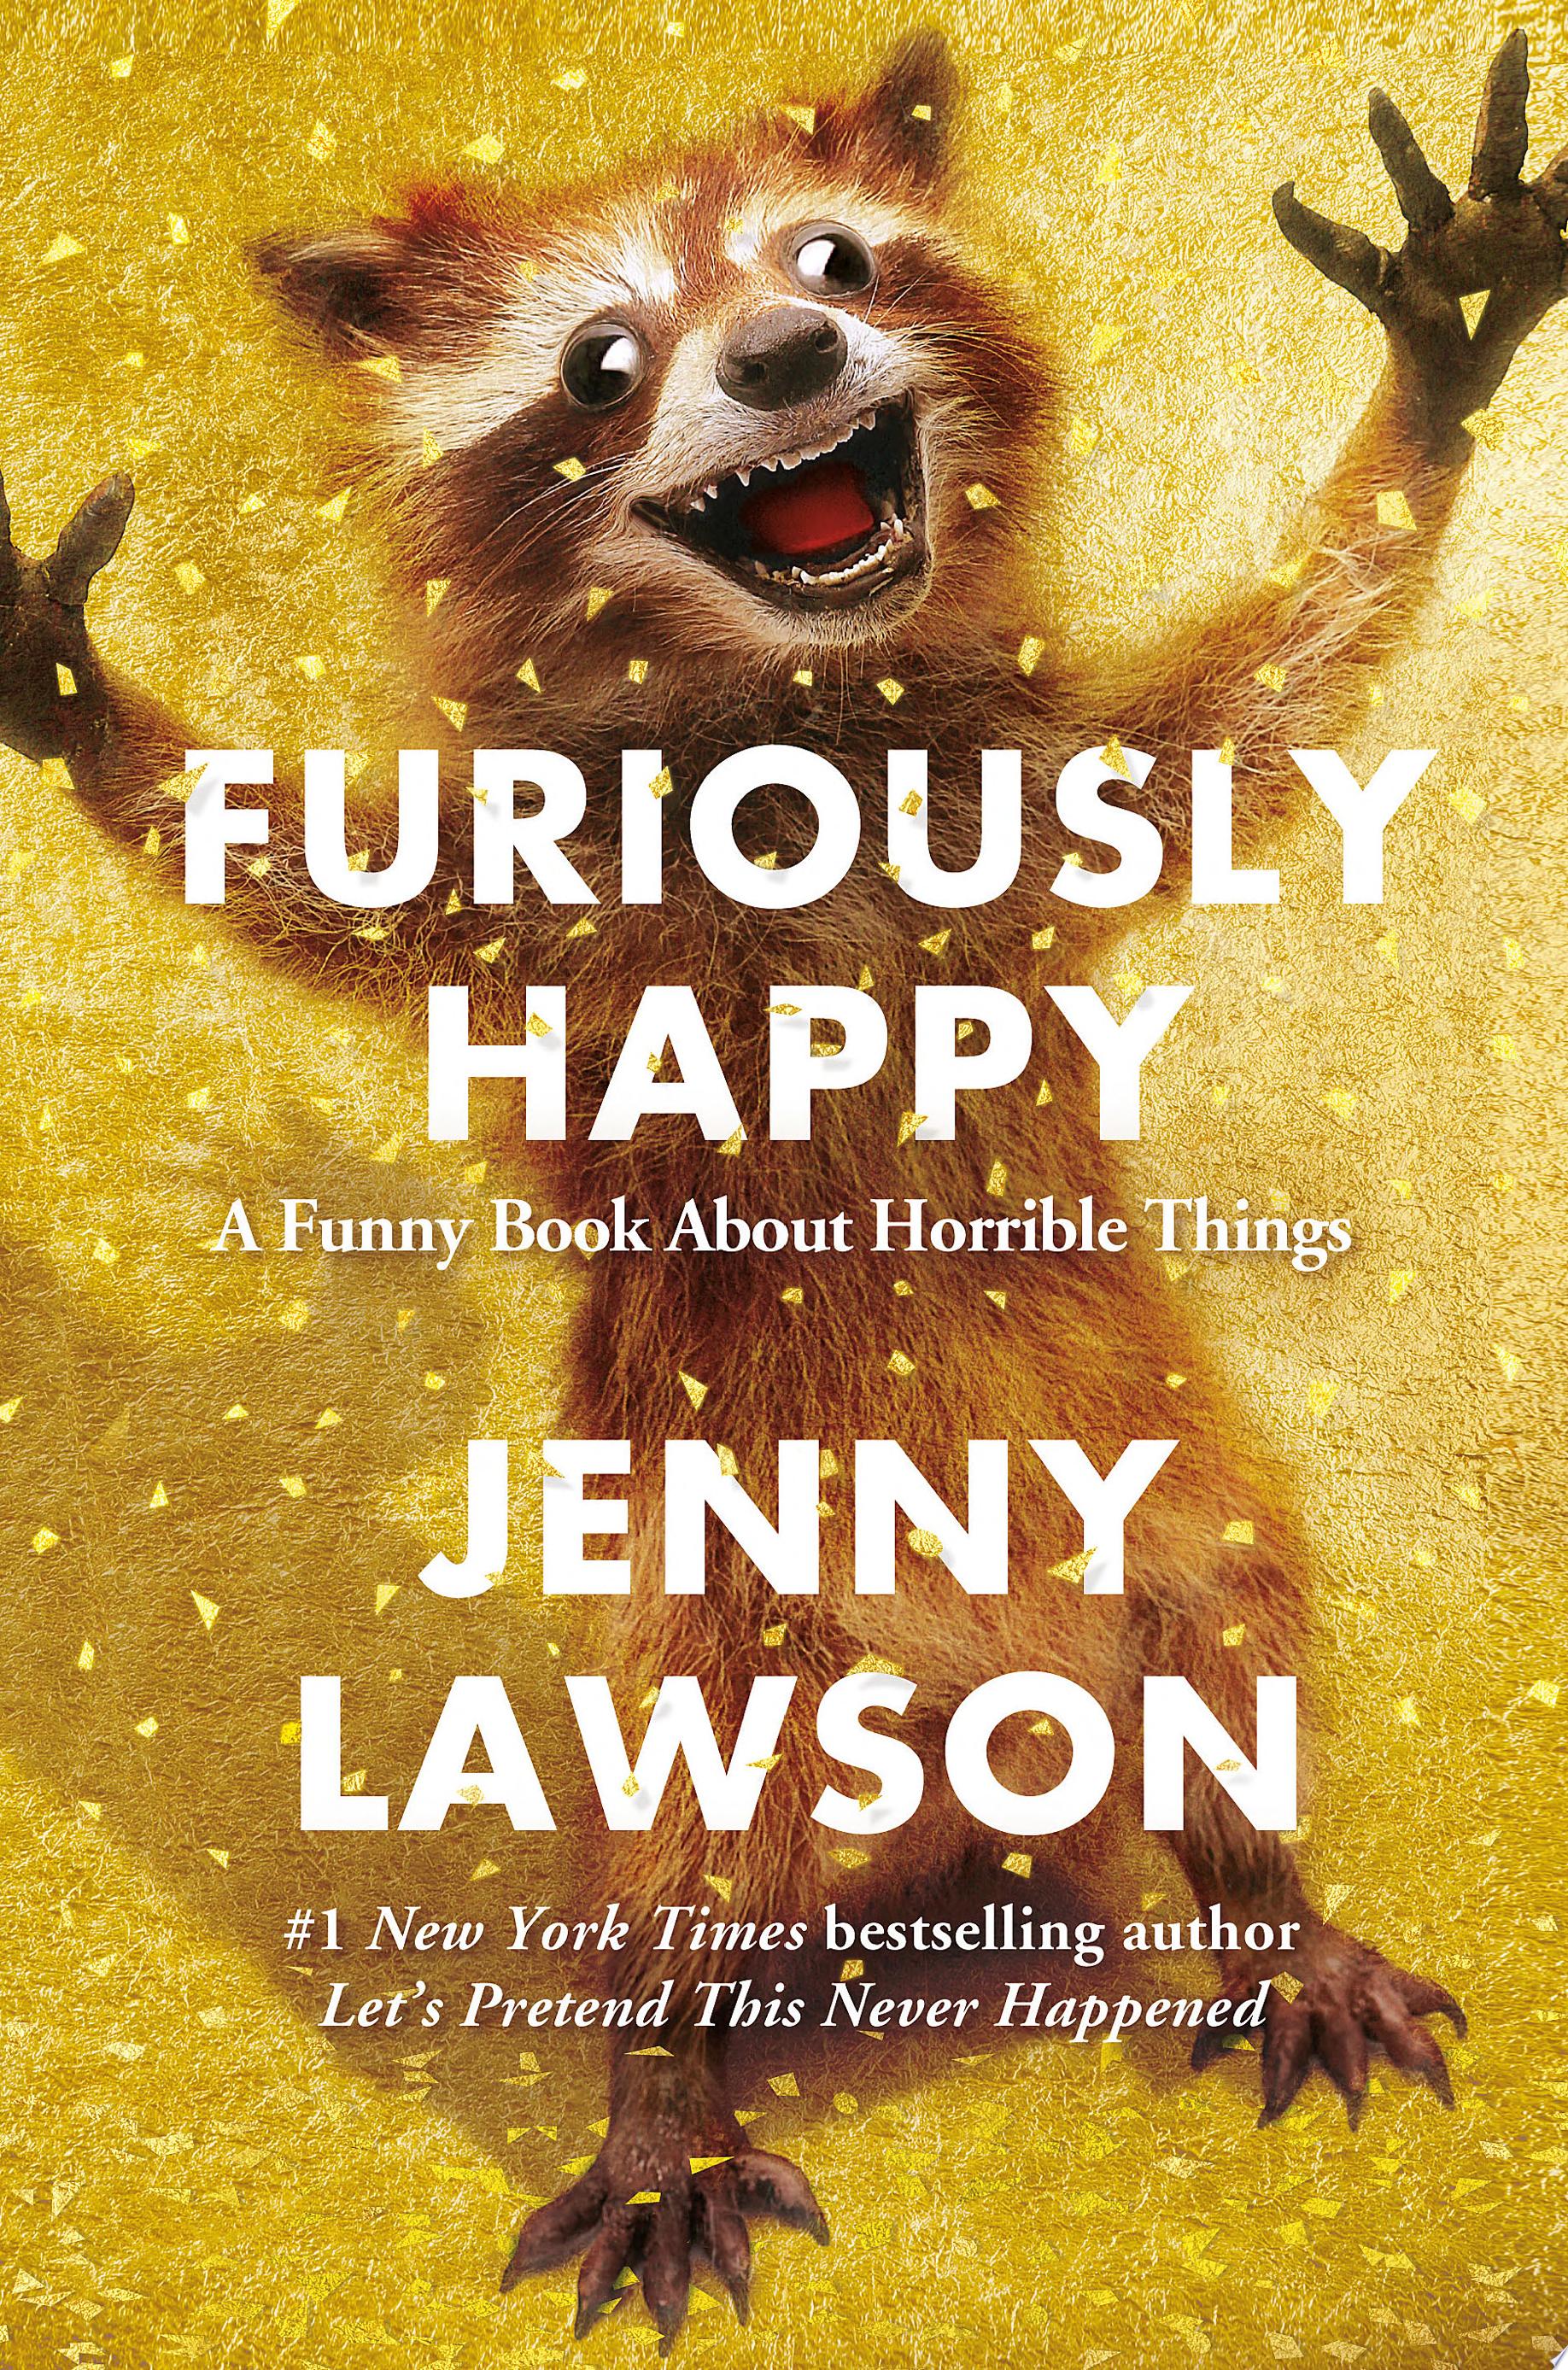 Image for "Furiously Happy"